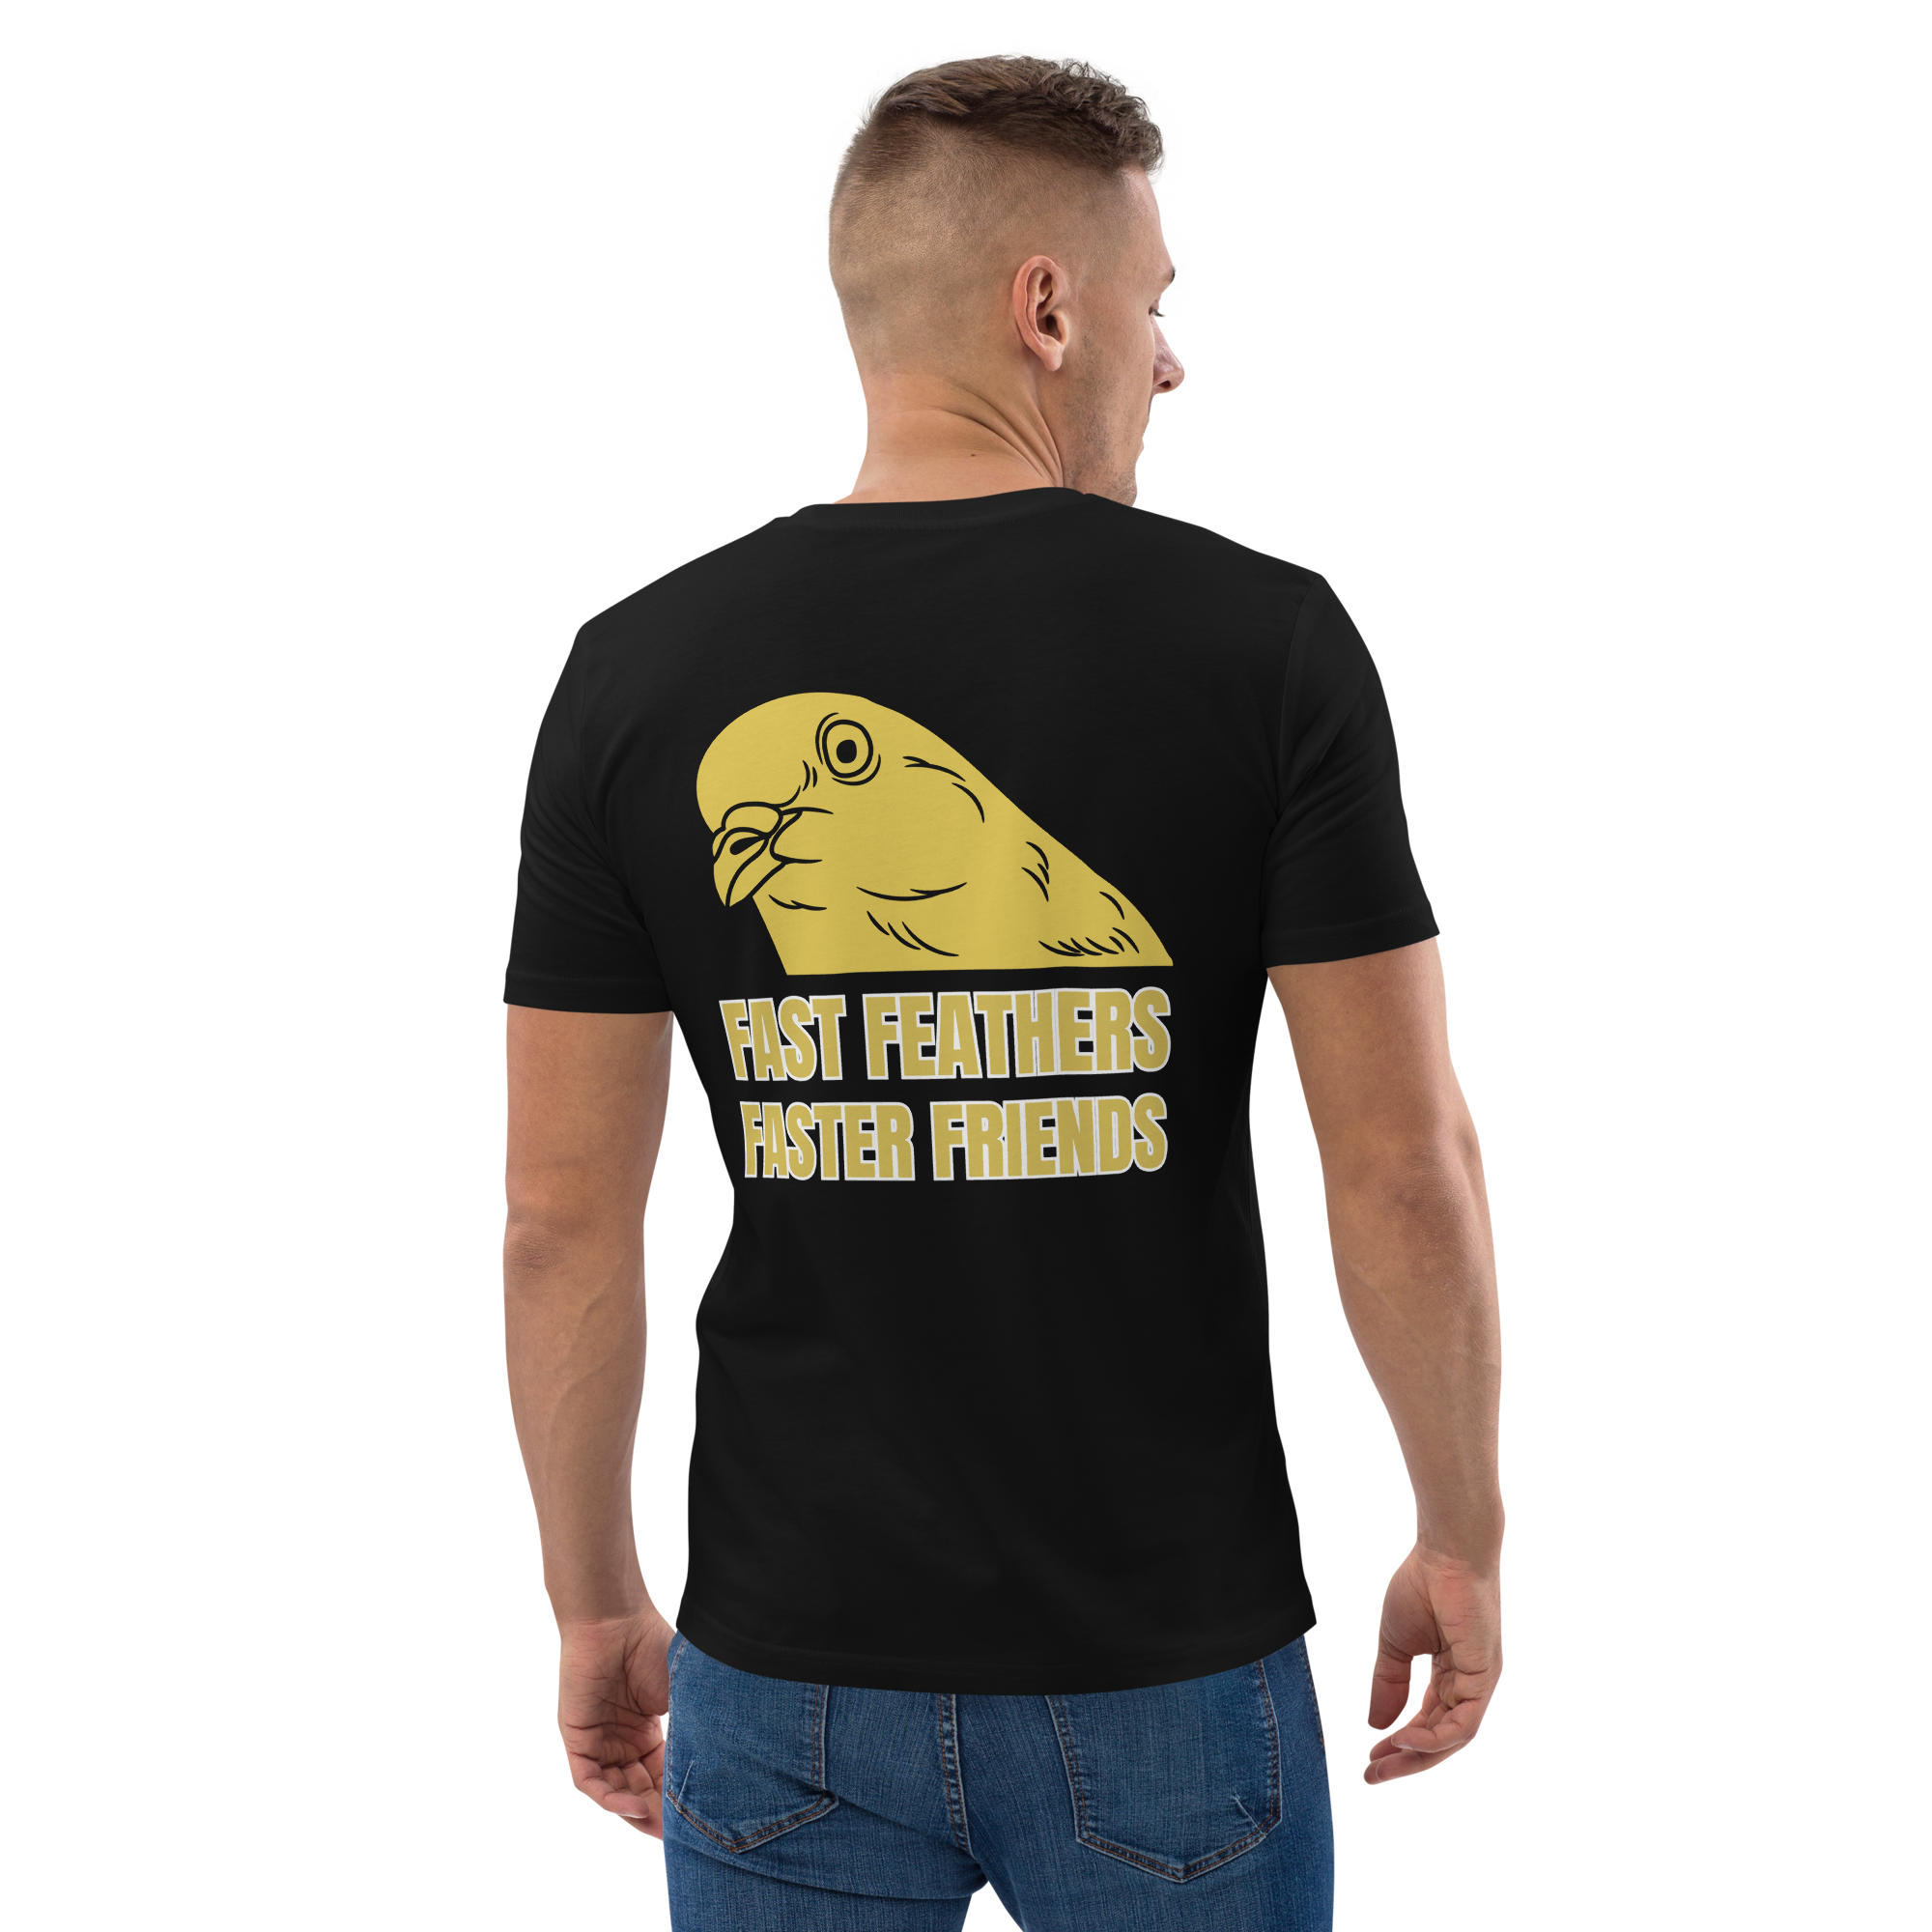 Fast Feathers, Faster Friends T-SHIRT